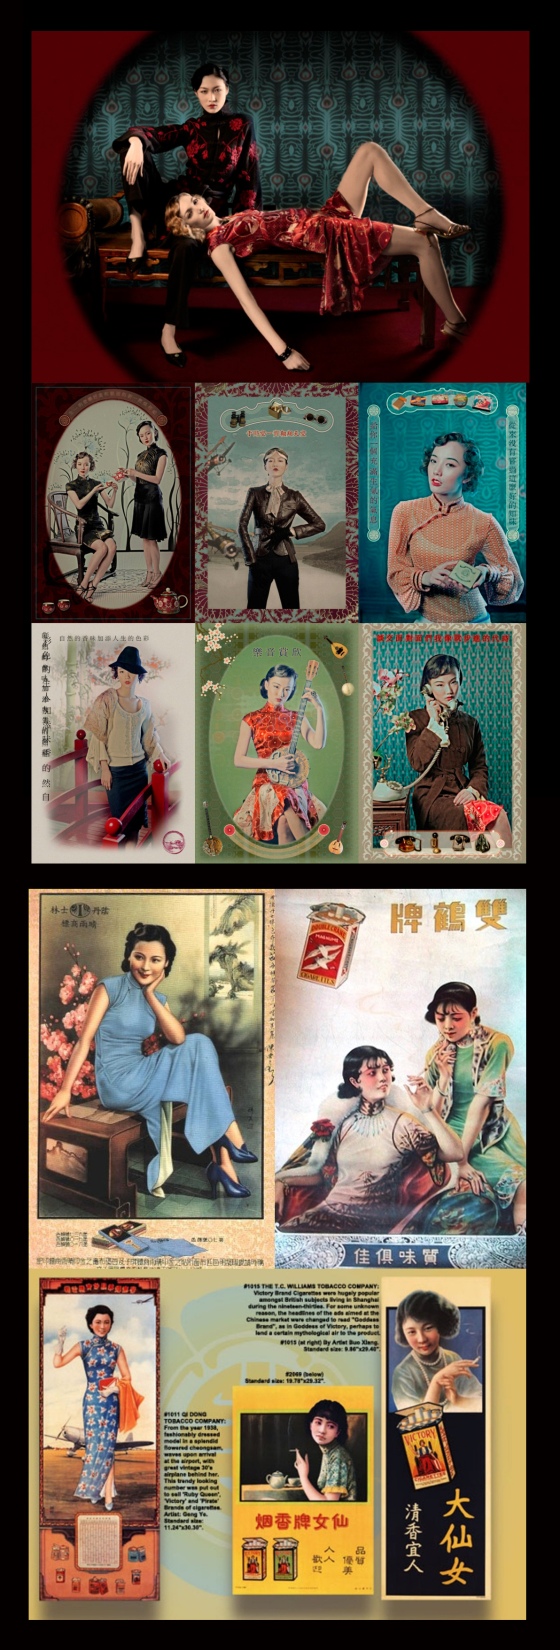 Advertising posters of Chinese Tobacco Companies